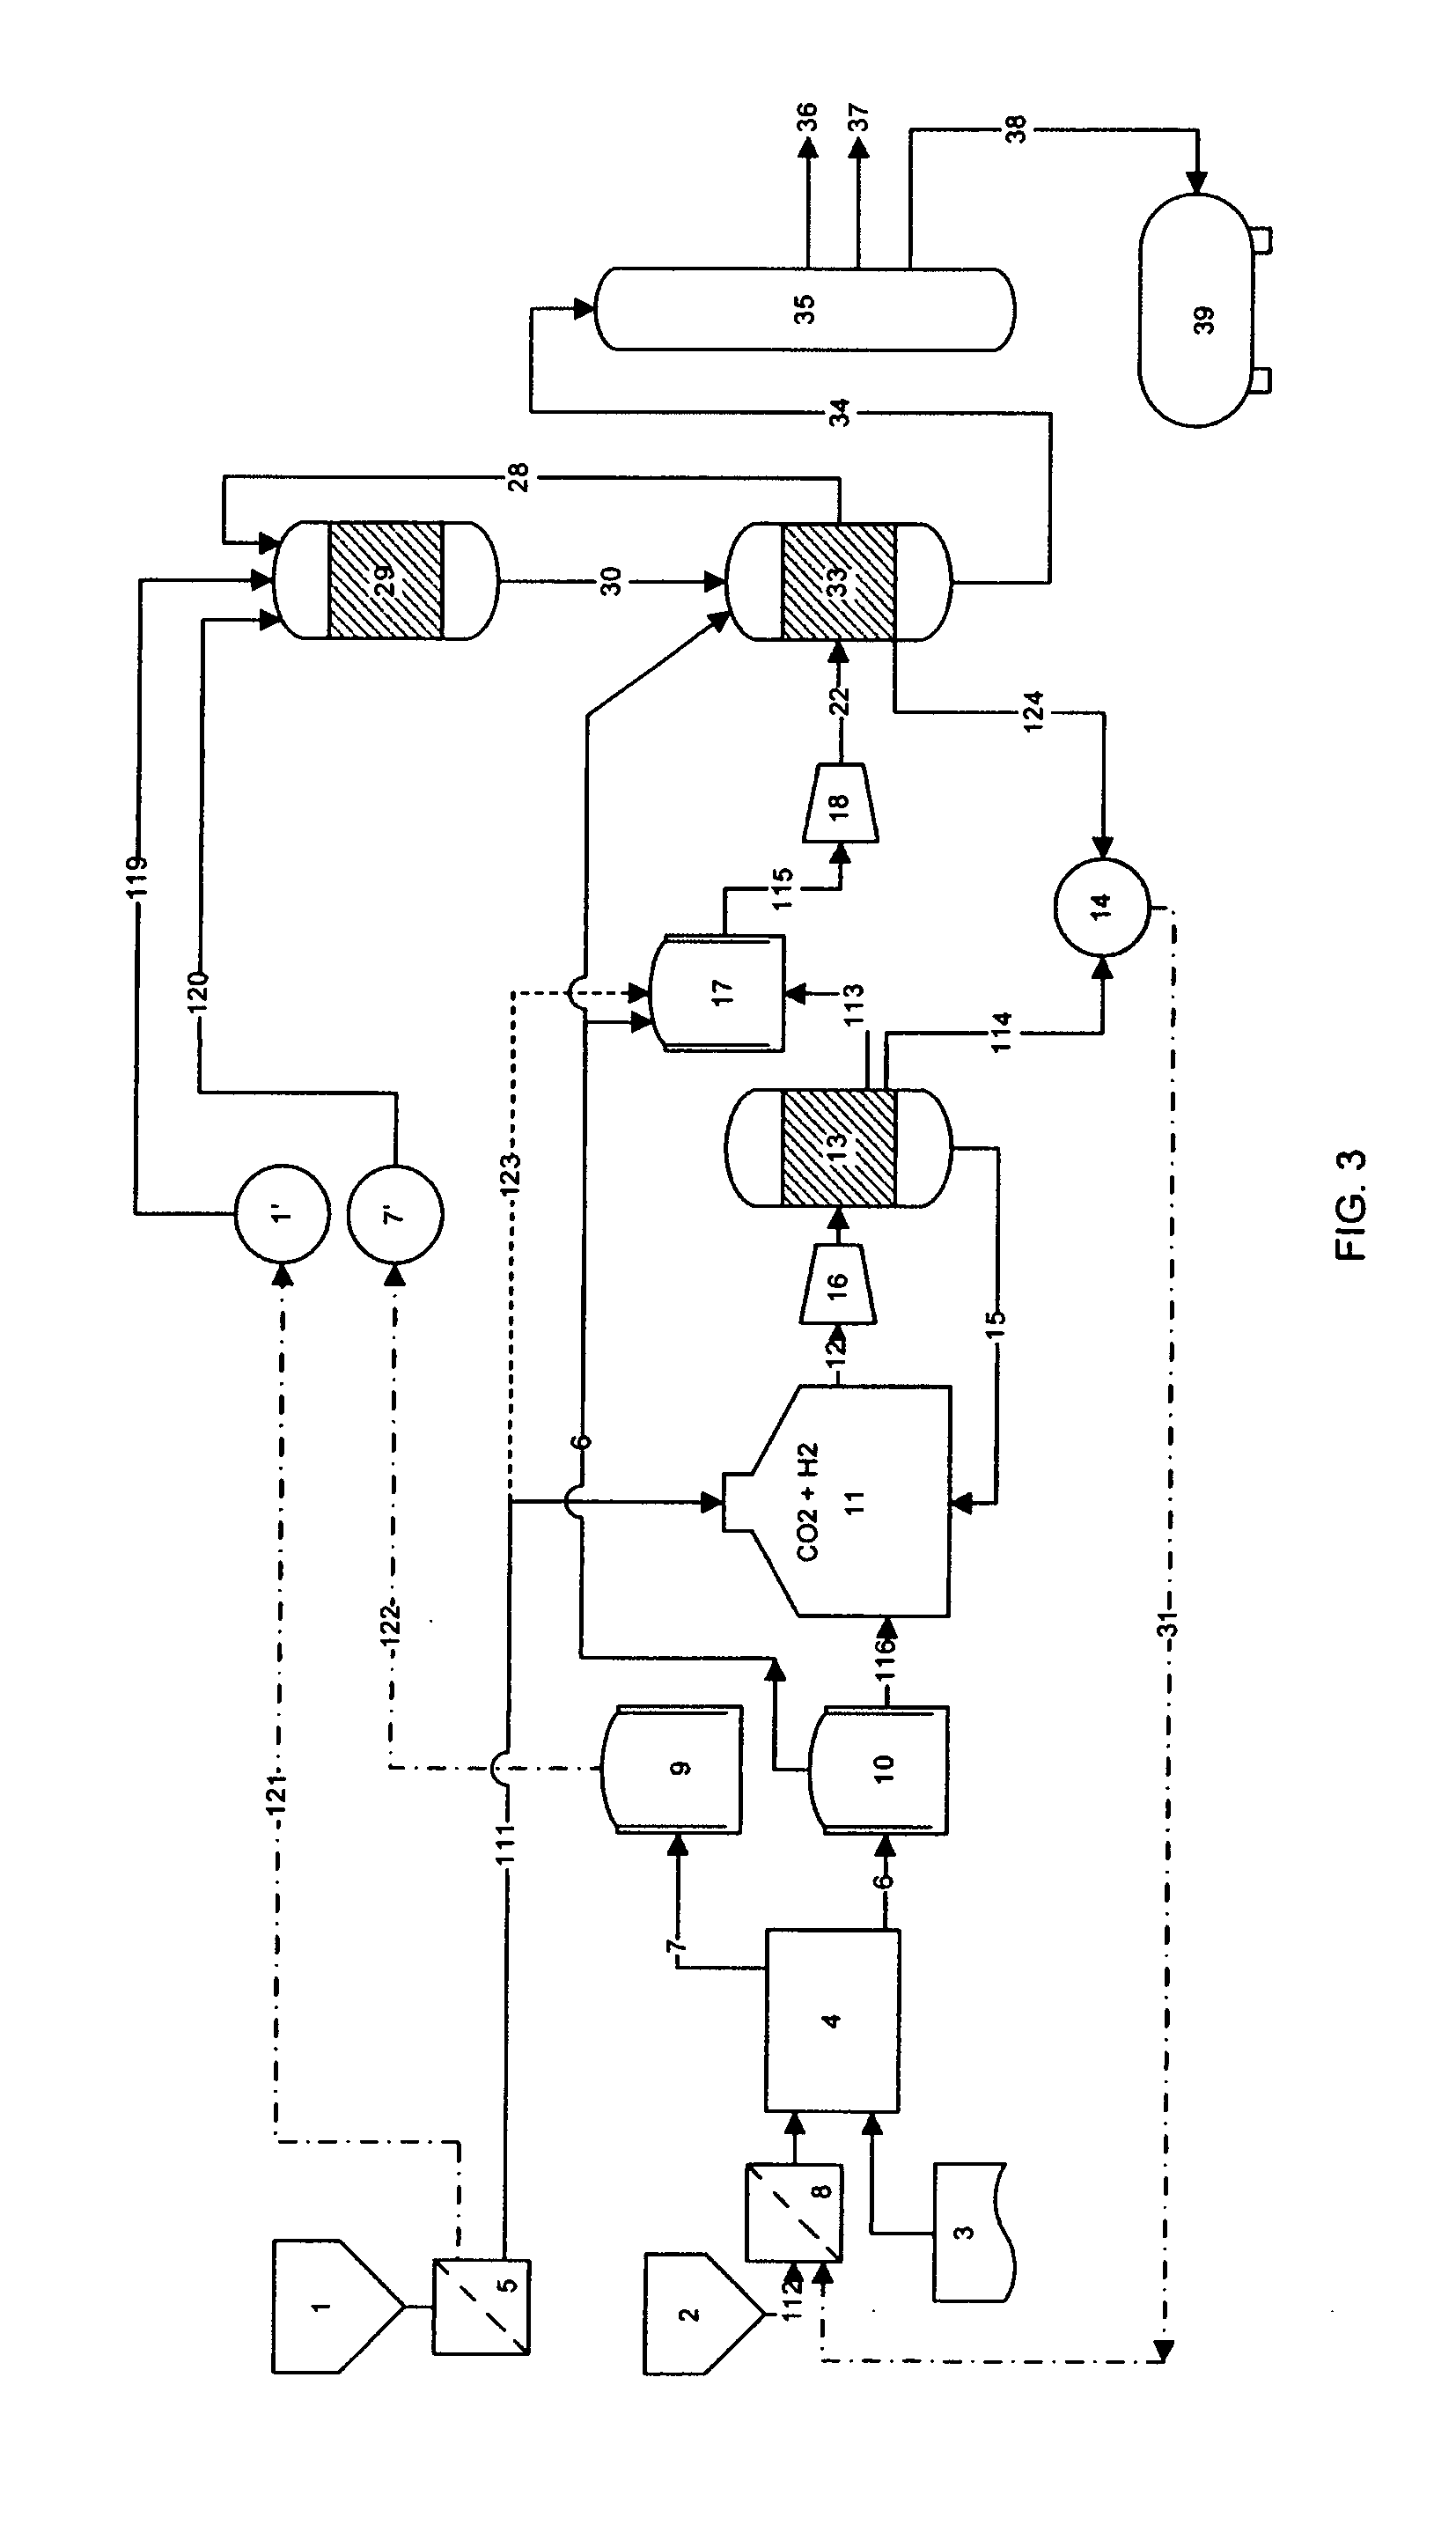 Process for producing liquid fuel from carbon dioxide and water